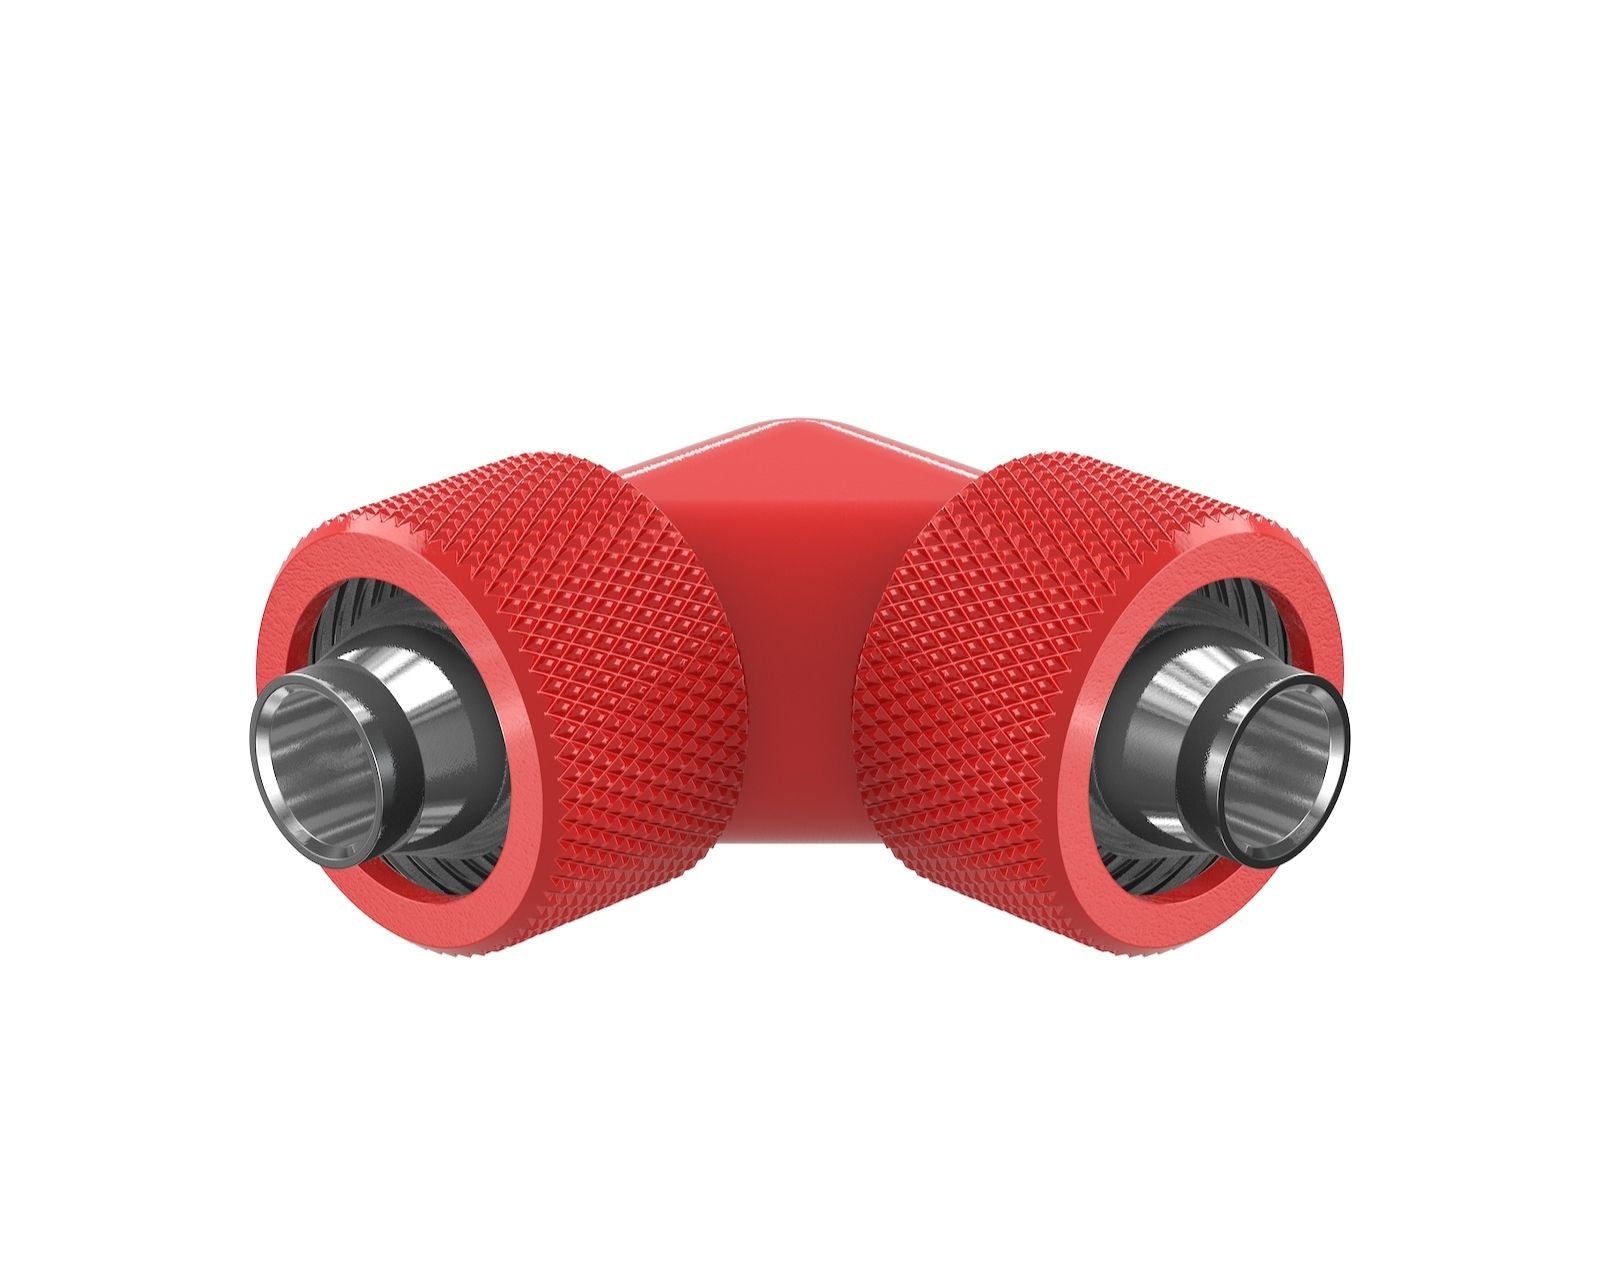 PrimoChill SecureFit SX - Premium 90 Degree Compression Fitting Set For 3/8in ID x 5/8in OD Flexible Tubing (F-SFSX5890) - Available in 20+ Colors, Custom Watercooling Loop Ready - Razor Red